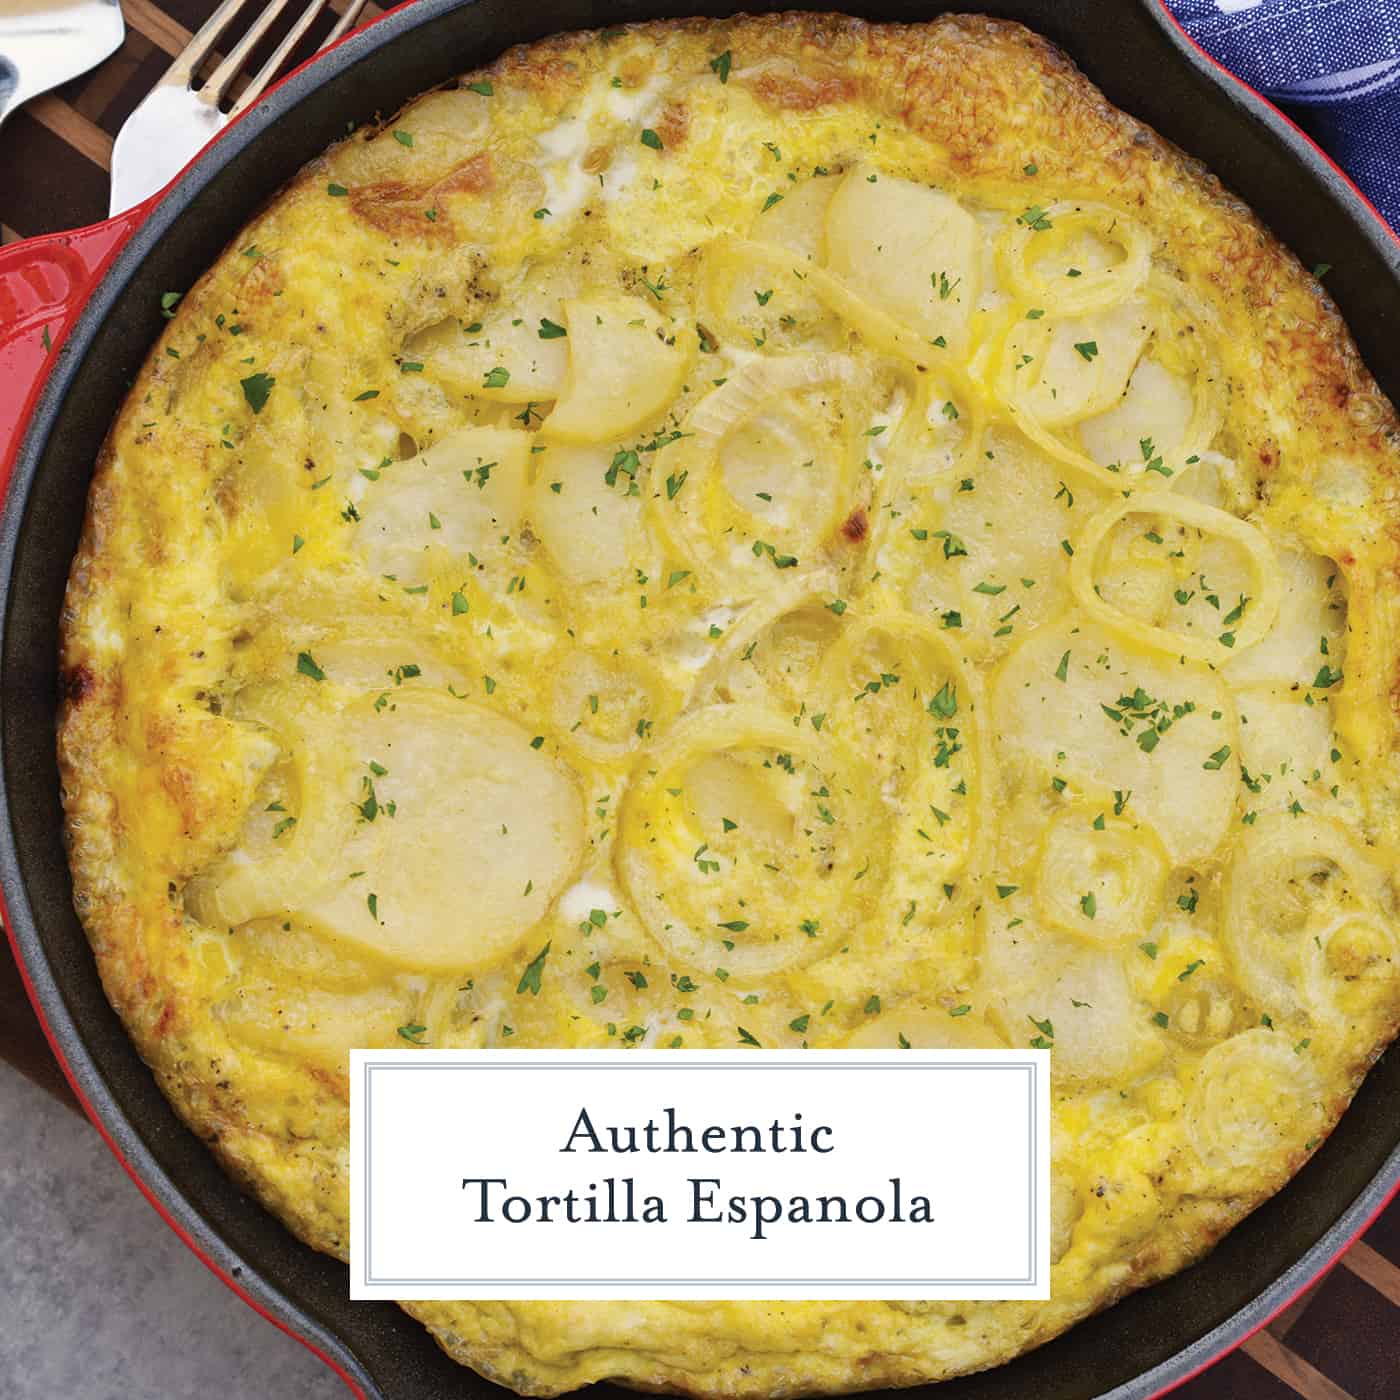 Tortilla Espanola, also known as Spanish Tortilla or Potato Tortilla, is a Spanish egg dish made with fried potatoes, onions and cheese. #tortillaespanola #spanishtortilla #potatotortilla www.savoryexperiments.com 